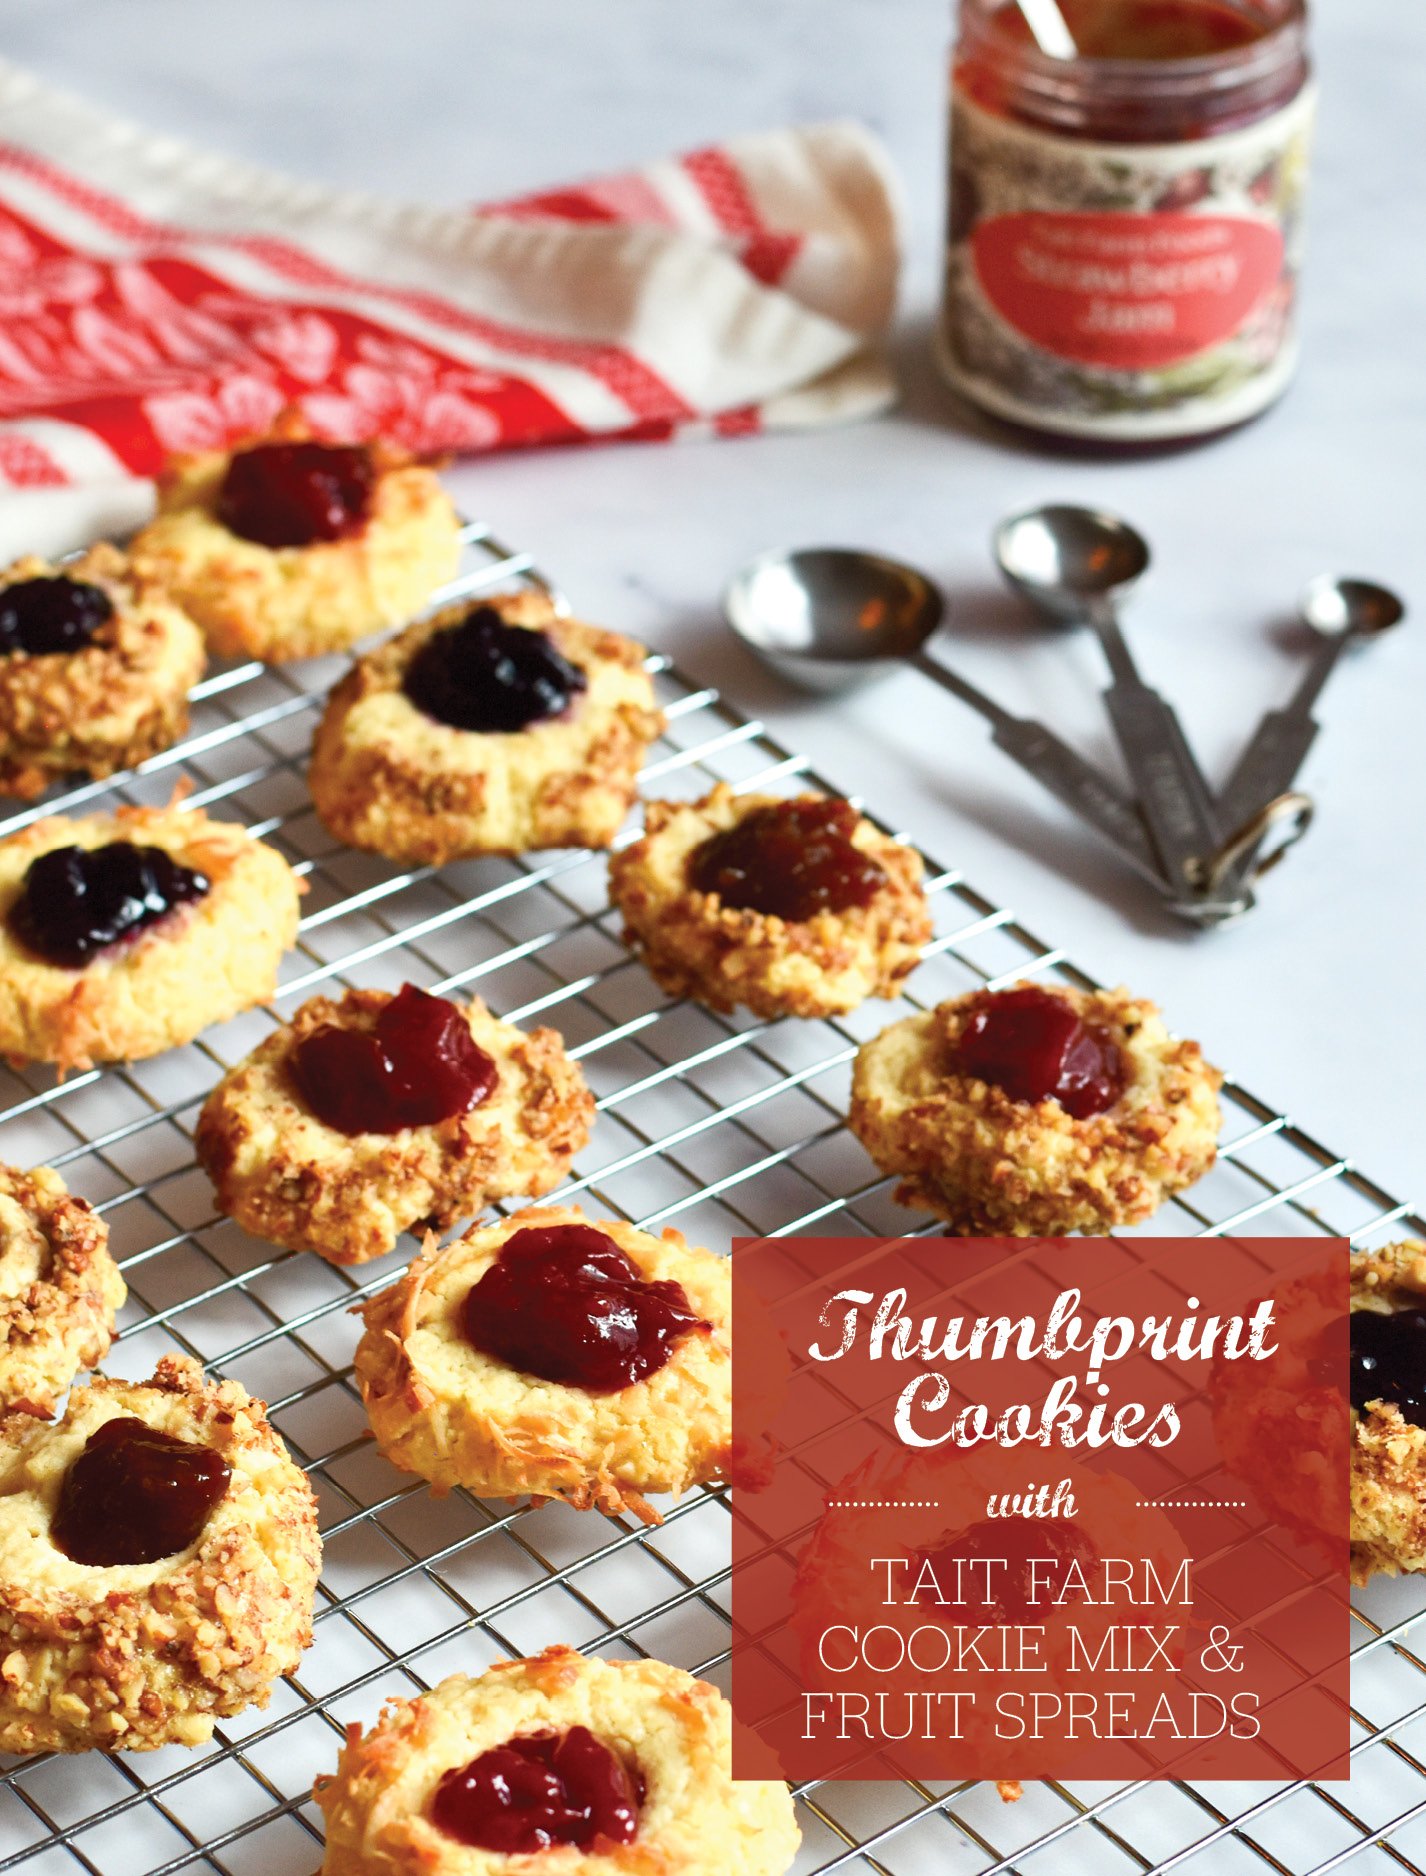 Thumbprint Cookies made with Tait Farm Baking Mix